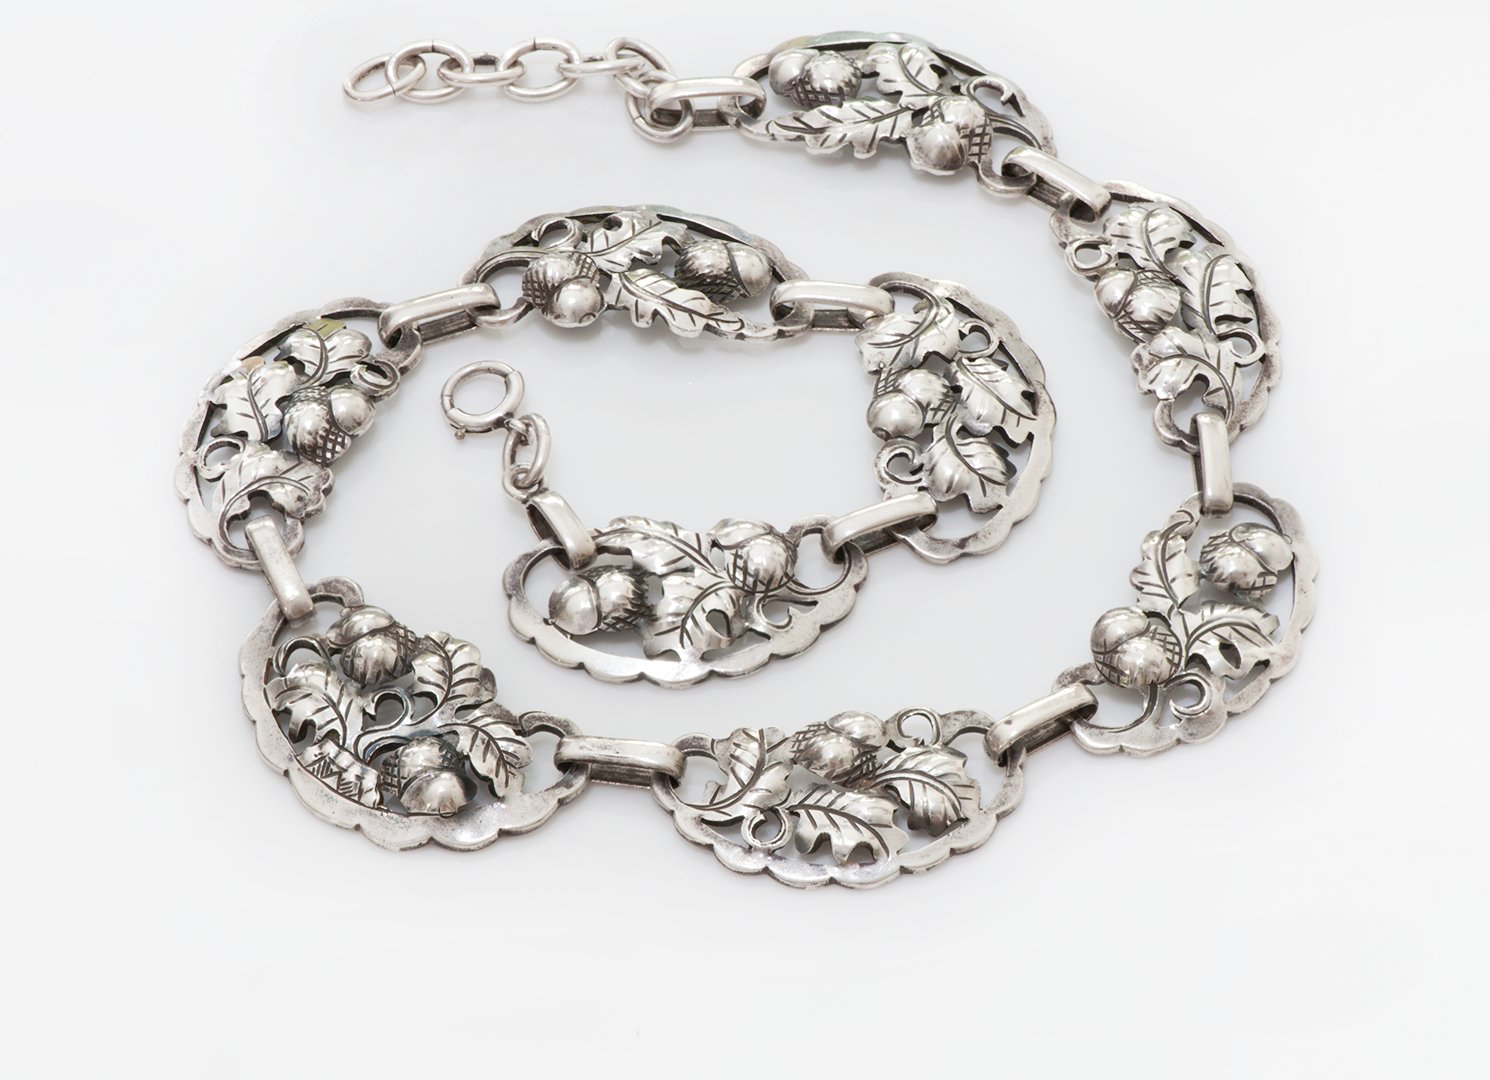 Vintage Silver Jewelry: The Health Benefits Few People Know About - DSF Antique Jewelry